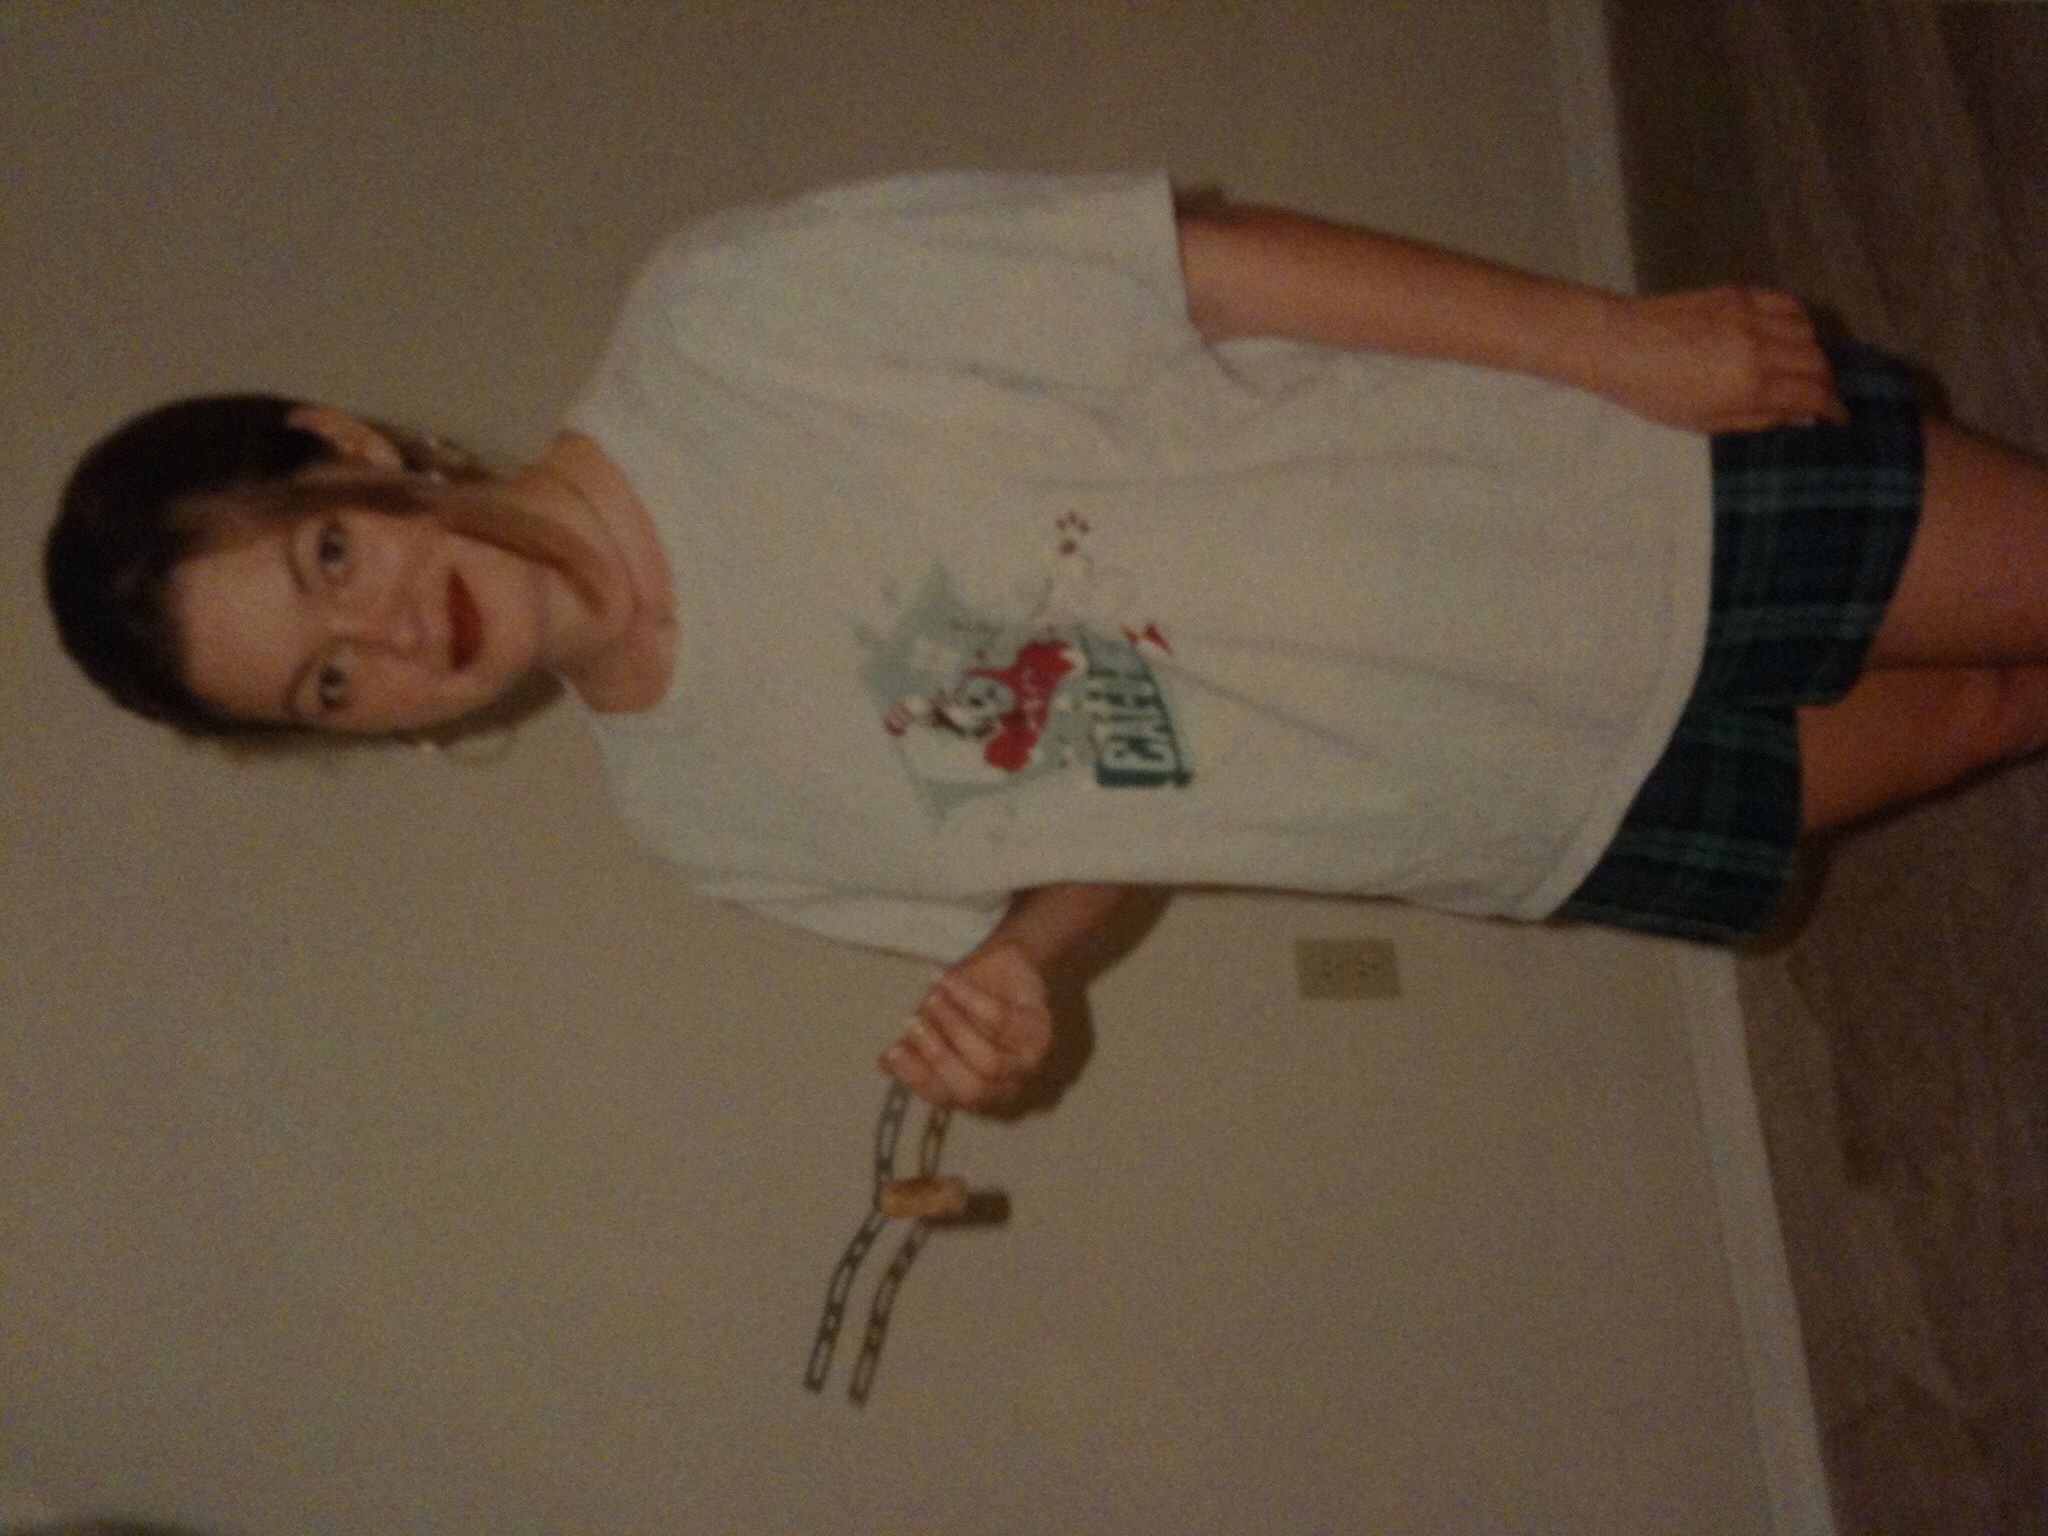 1997 - Tampa, FL - Moving day, everything packed and needing a glass of wine! So, I MacGyver'd a cork screw with all I could find... A drill, a screw 